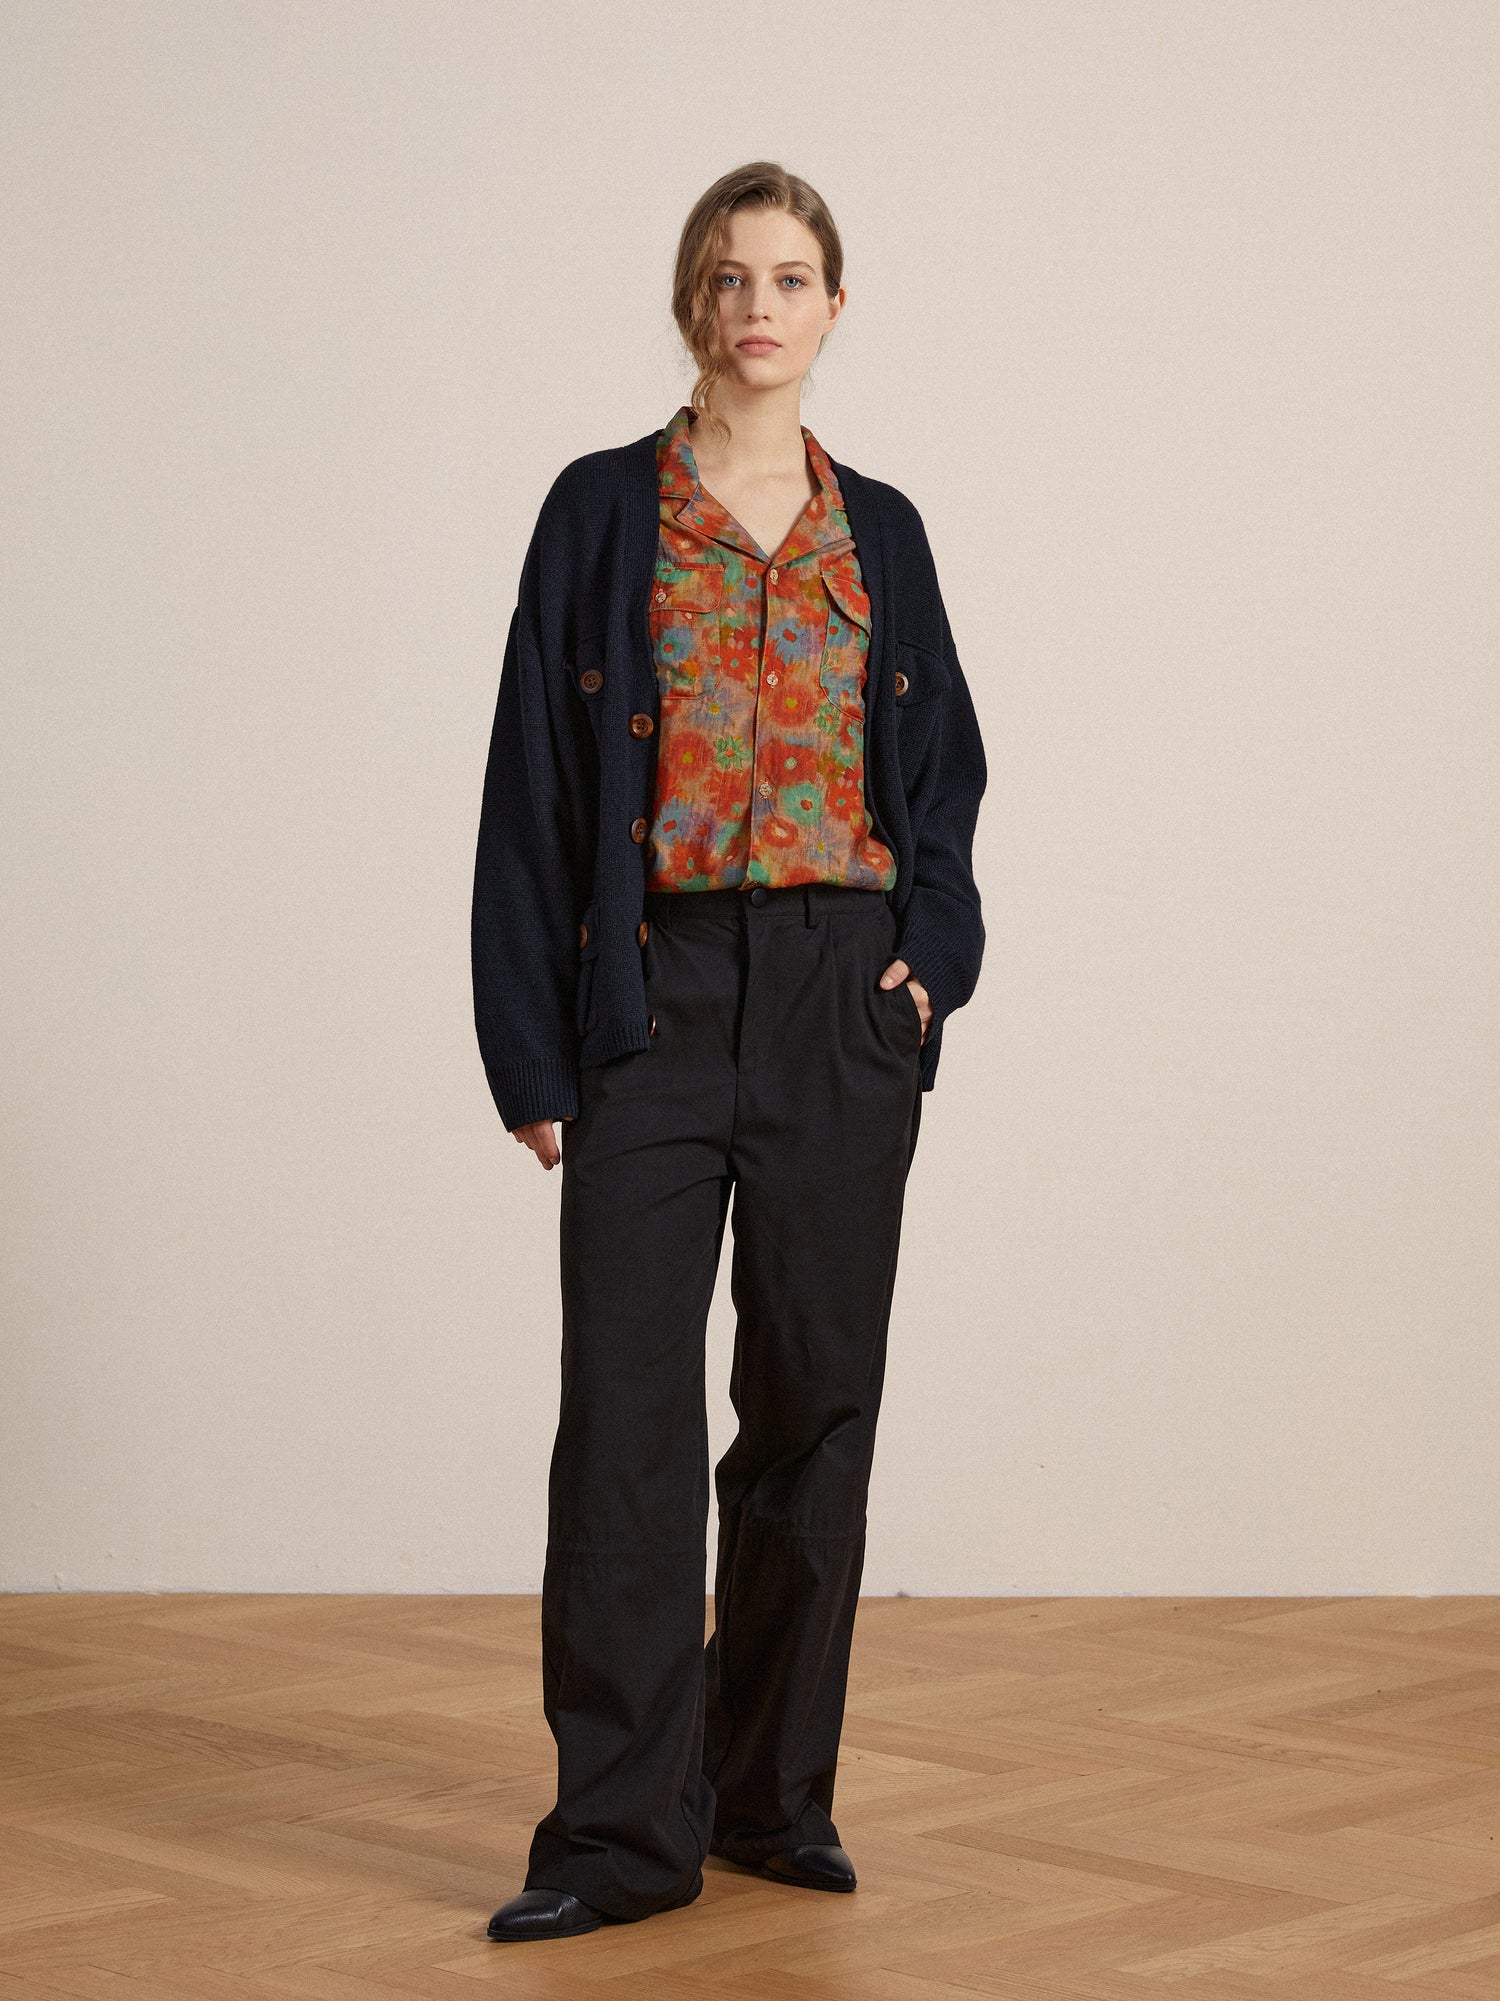 A woman stands in a neutral-toned room wearing a navy cardigan, colorful blouse, and Found Tencel Pleated Pants, looking directly at the camera.